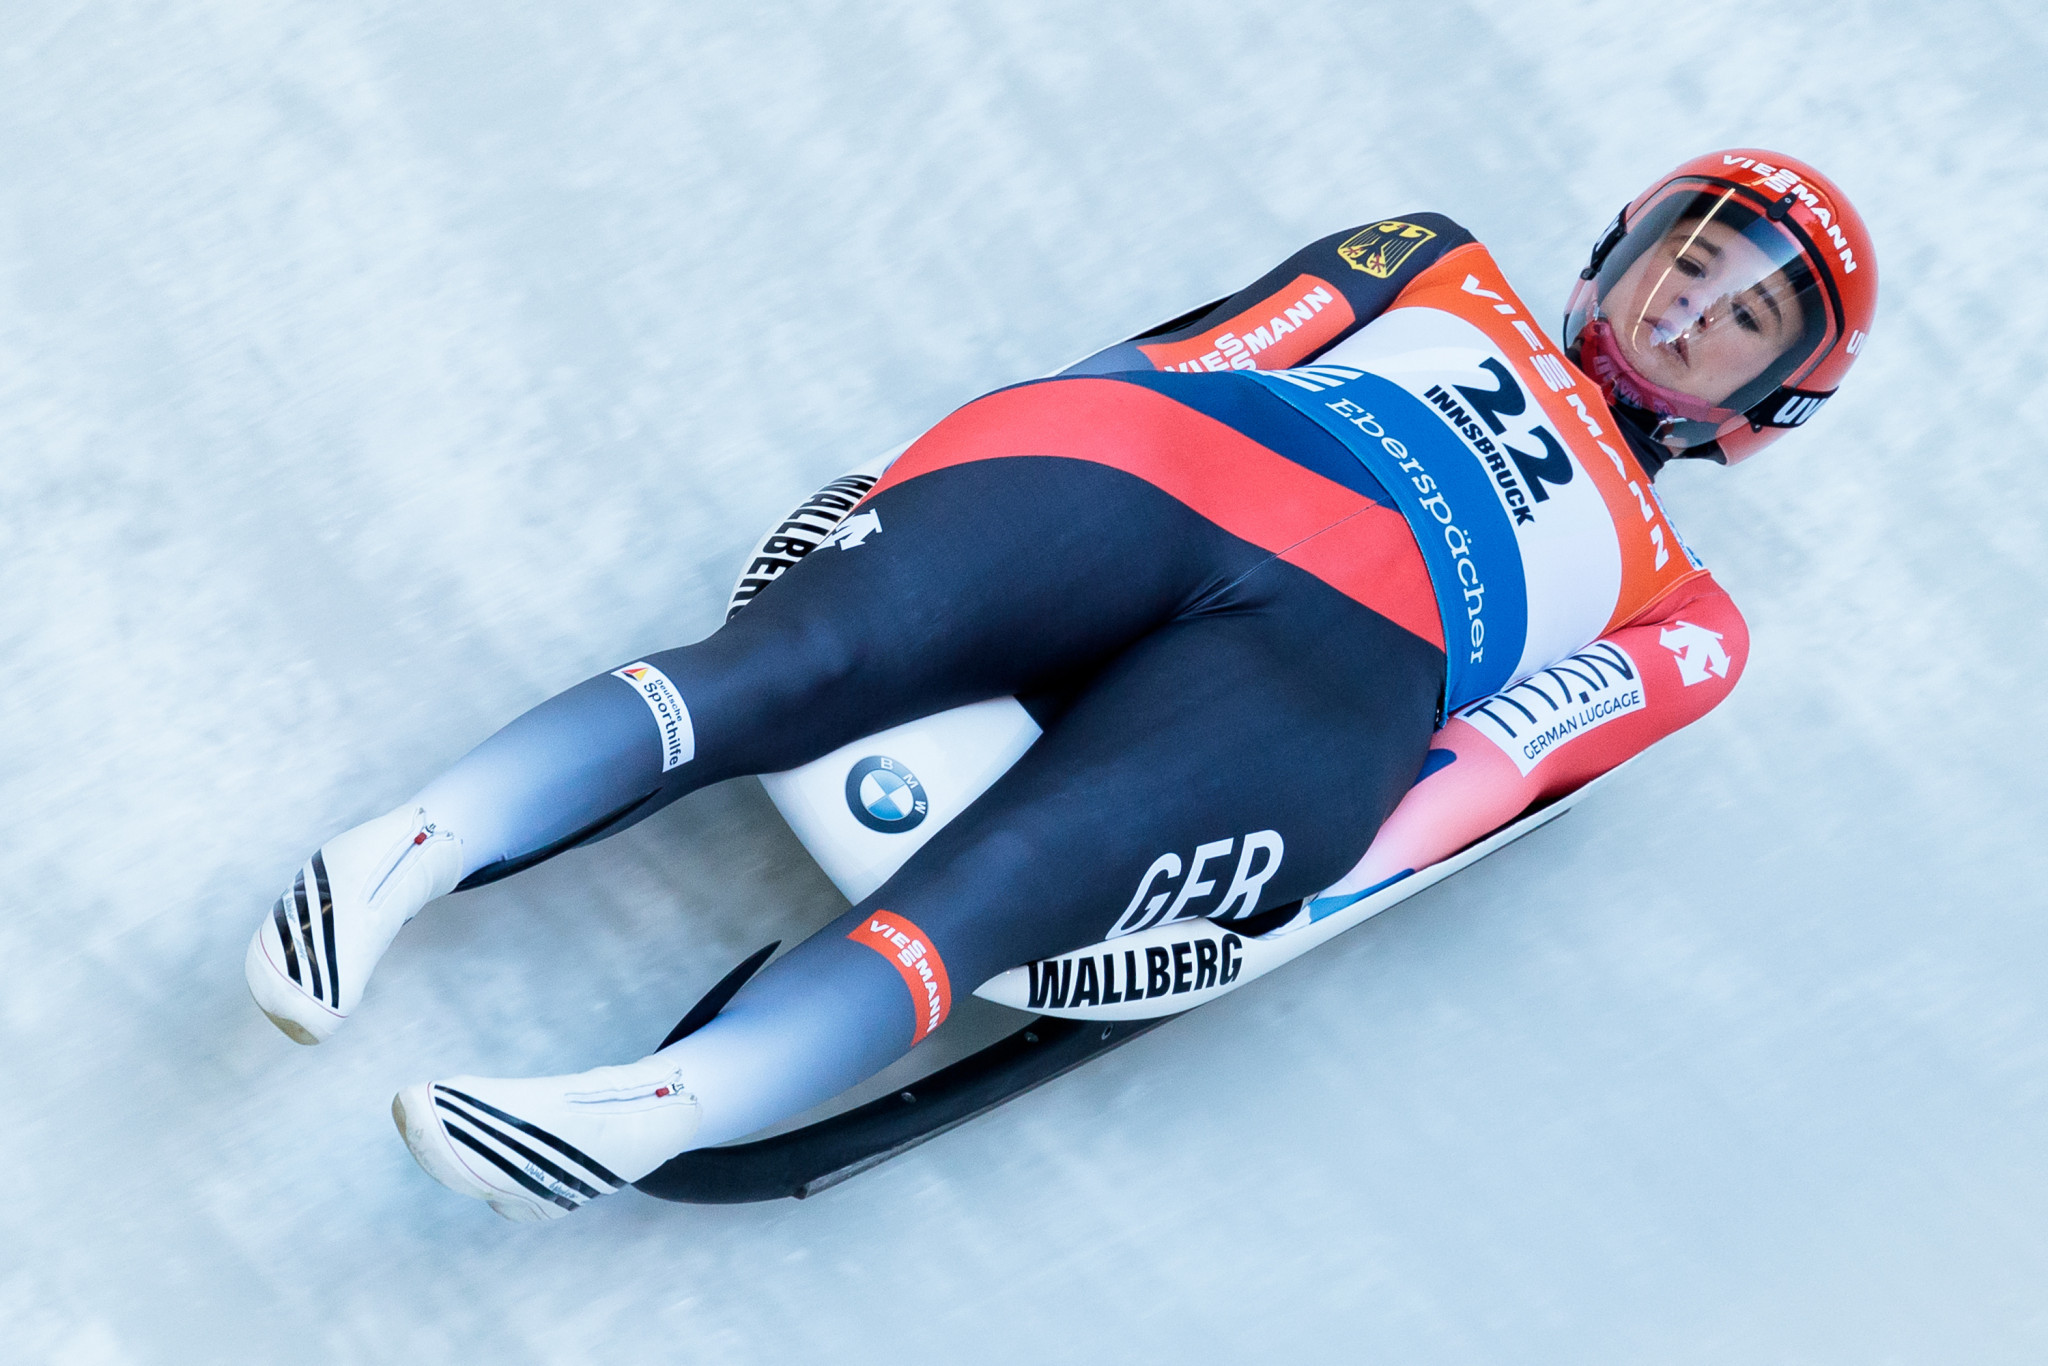 Luge World Cup in Innsbruck given green light despite new rules in Austria